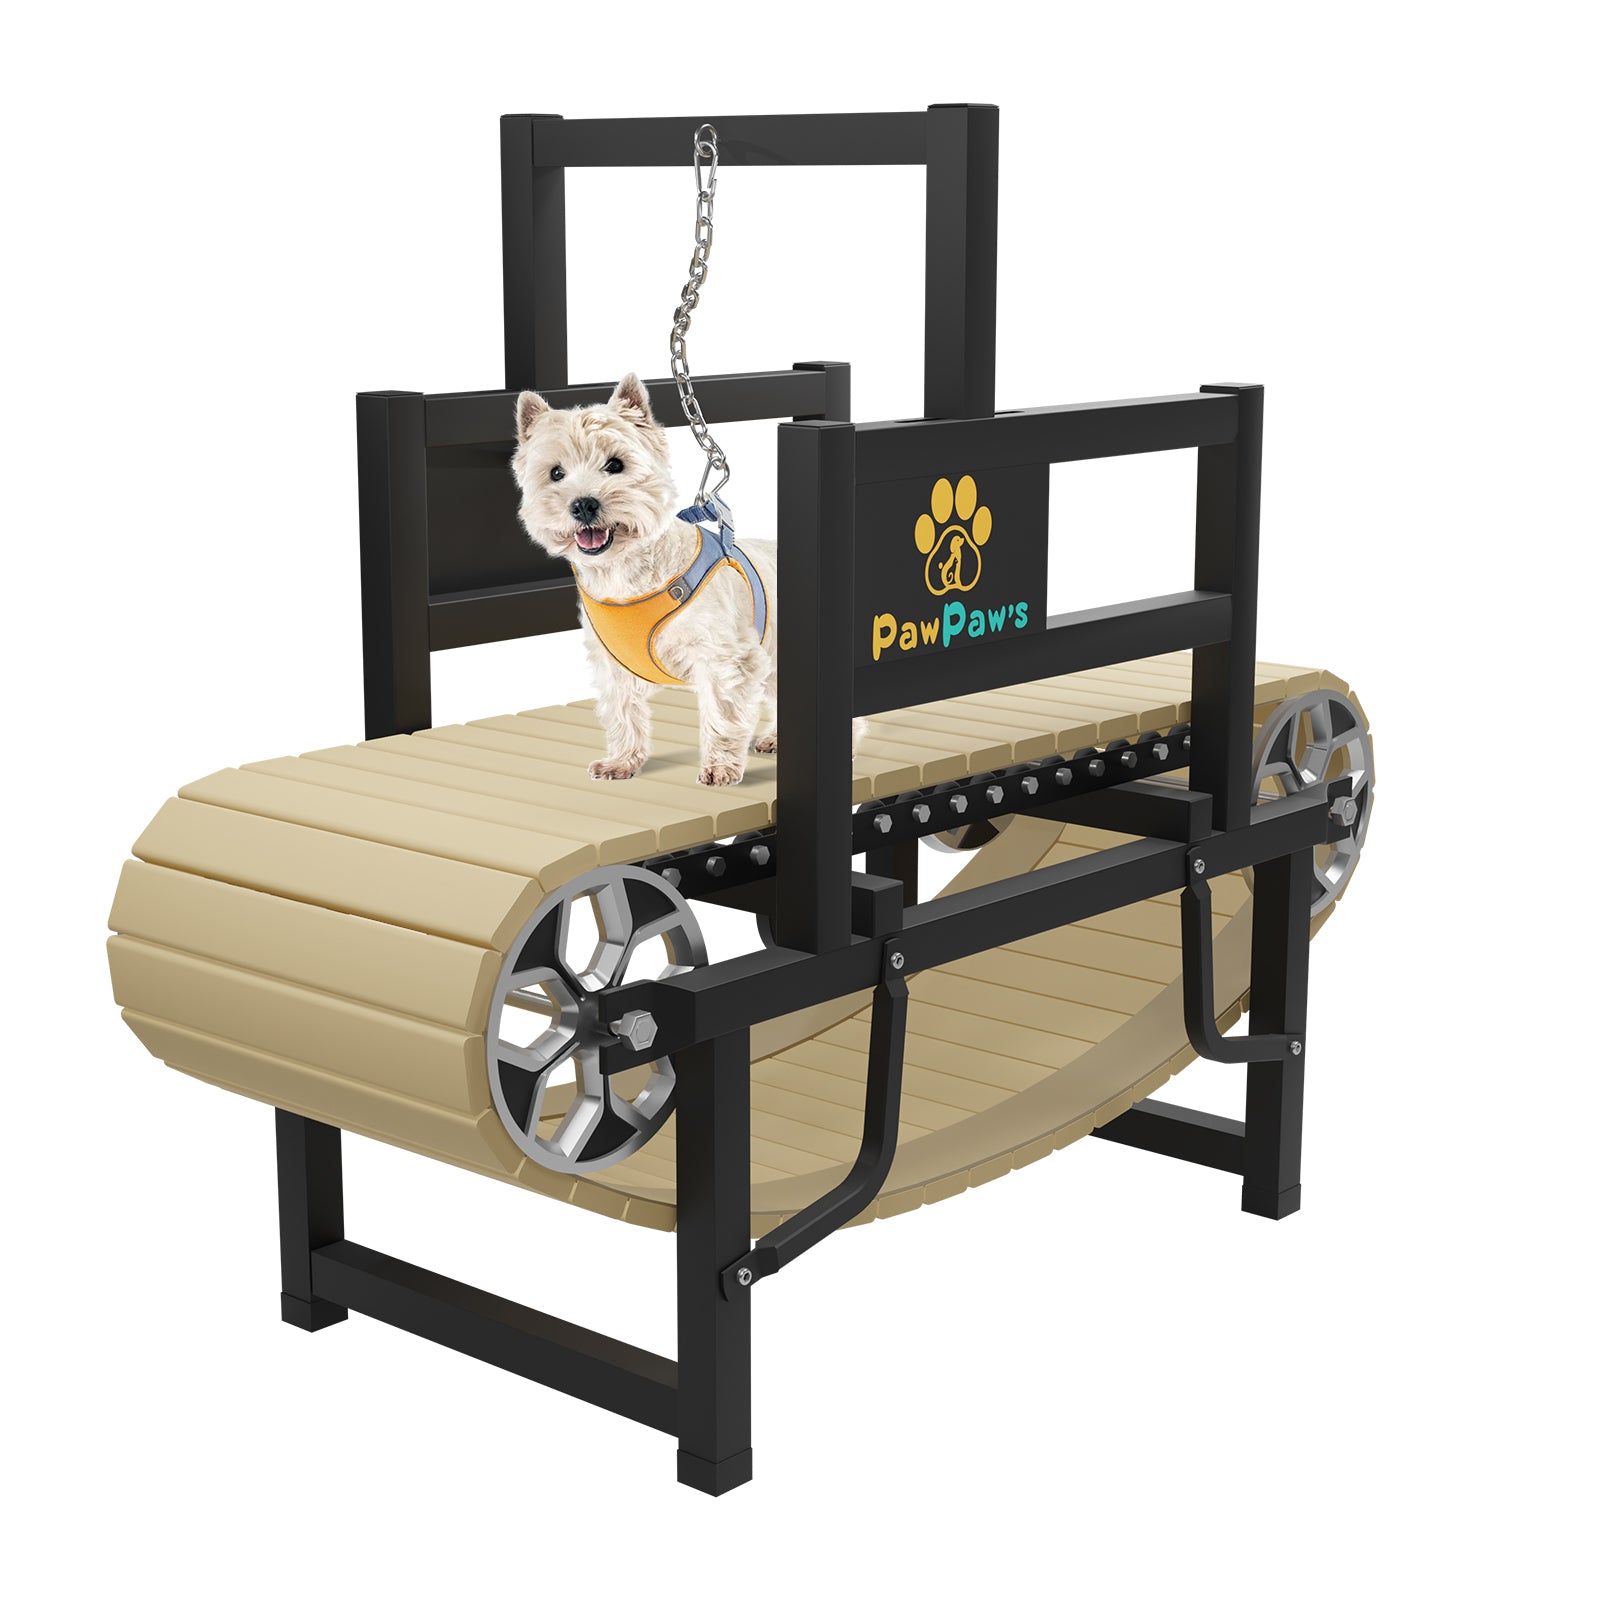 Pawpaw's Dog Treadmill for Small Dogs, Mini Dogs